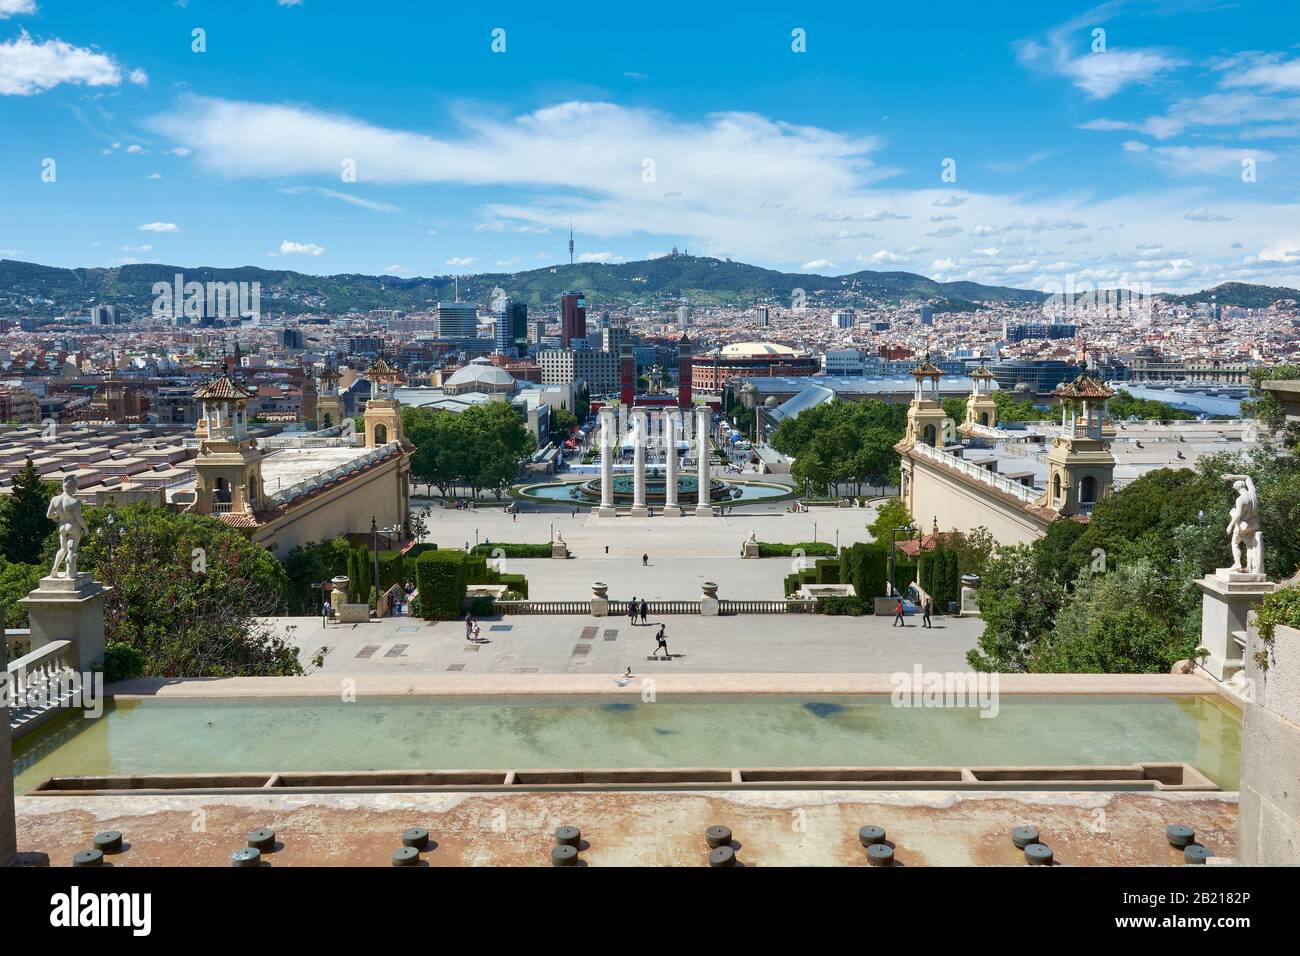 BARCELONA, SPAIN - MAY 13, 2017: Horizontal shot. View from Montjuic Hill. City of Barcelona with several iconic buildings and locations. Four Columns Stock Photo